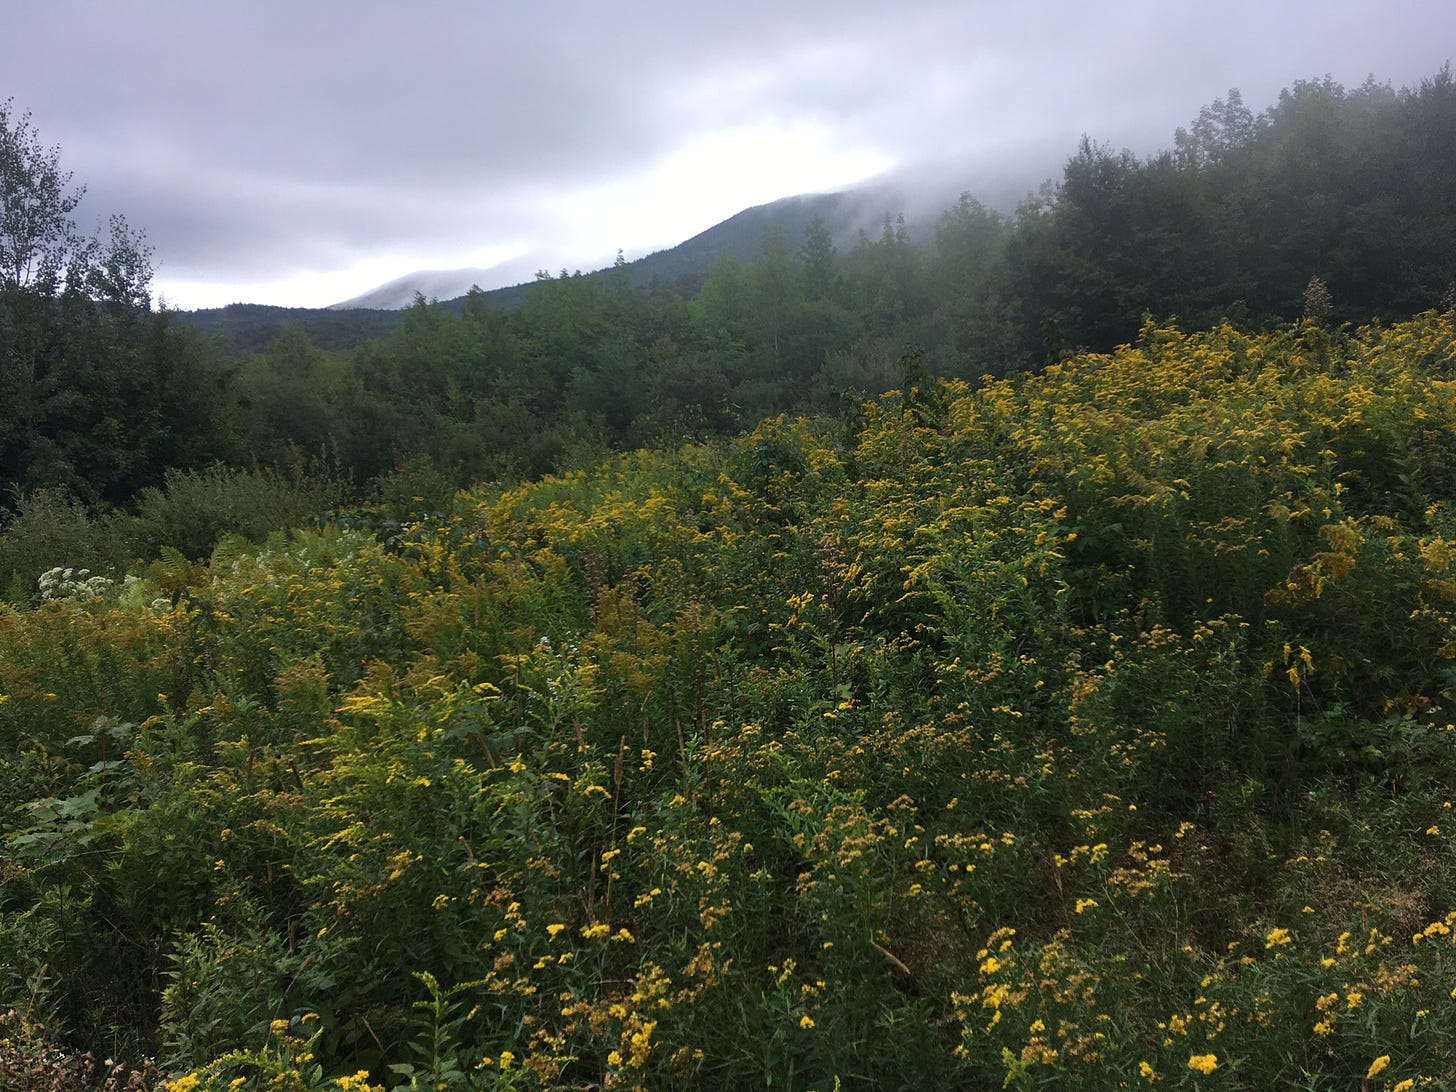 A meadow full of goldenrods in bloom with a mountain ridge shrouded in fog in the background